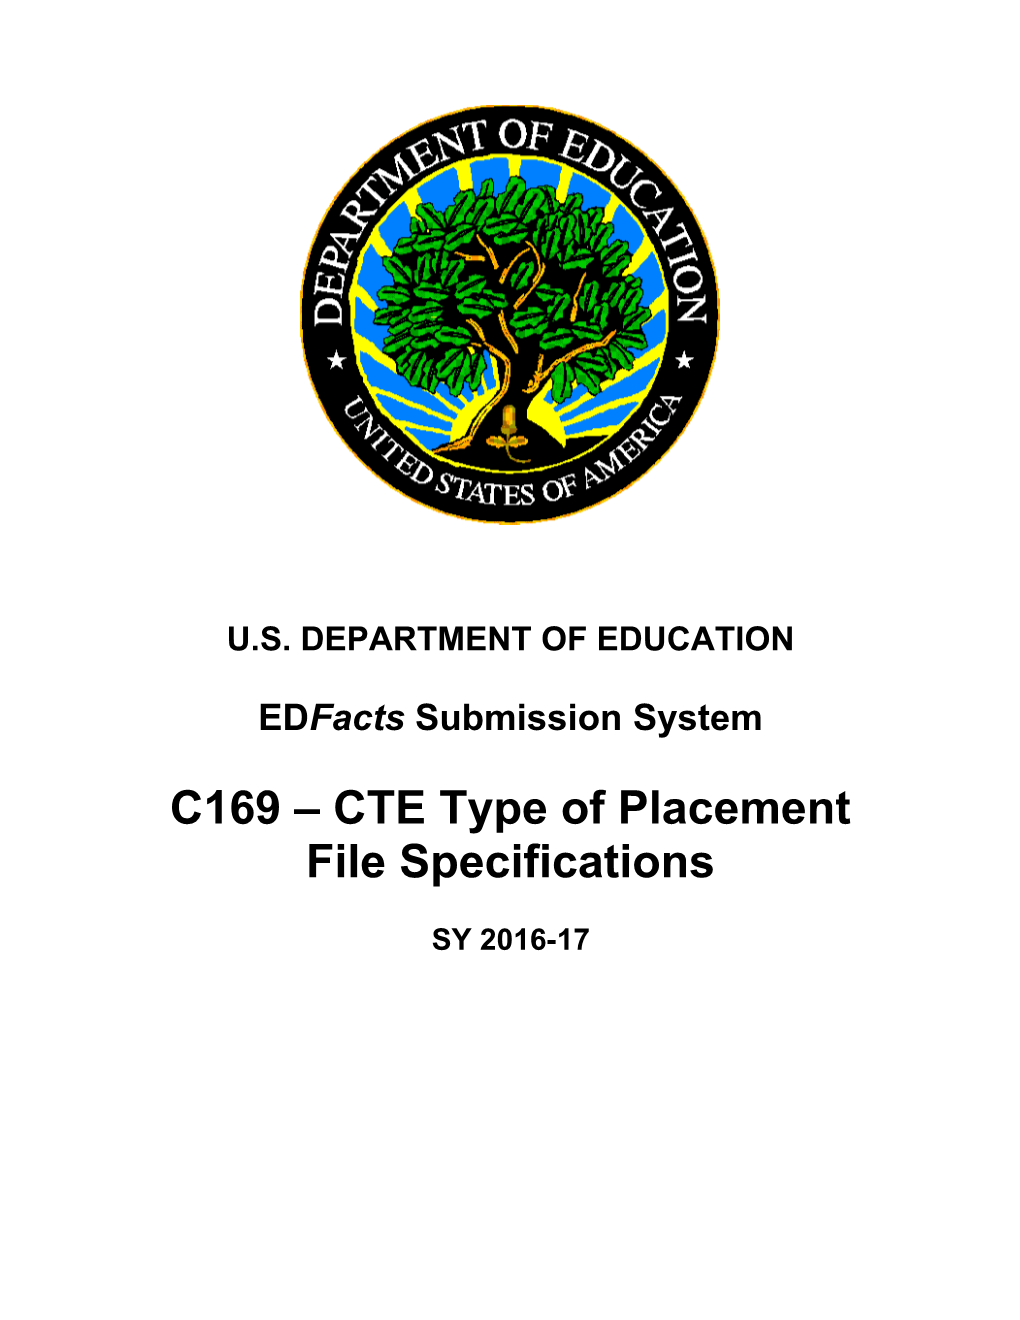 C169 - CTE Type of Placement File Specification (Msword)